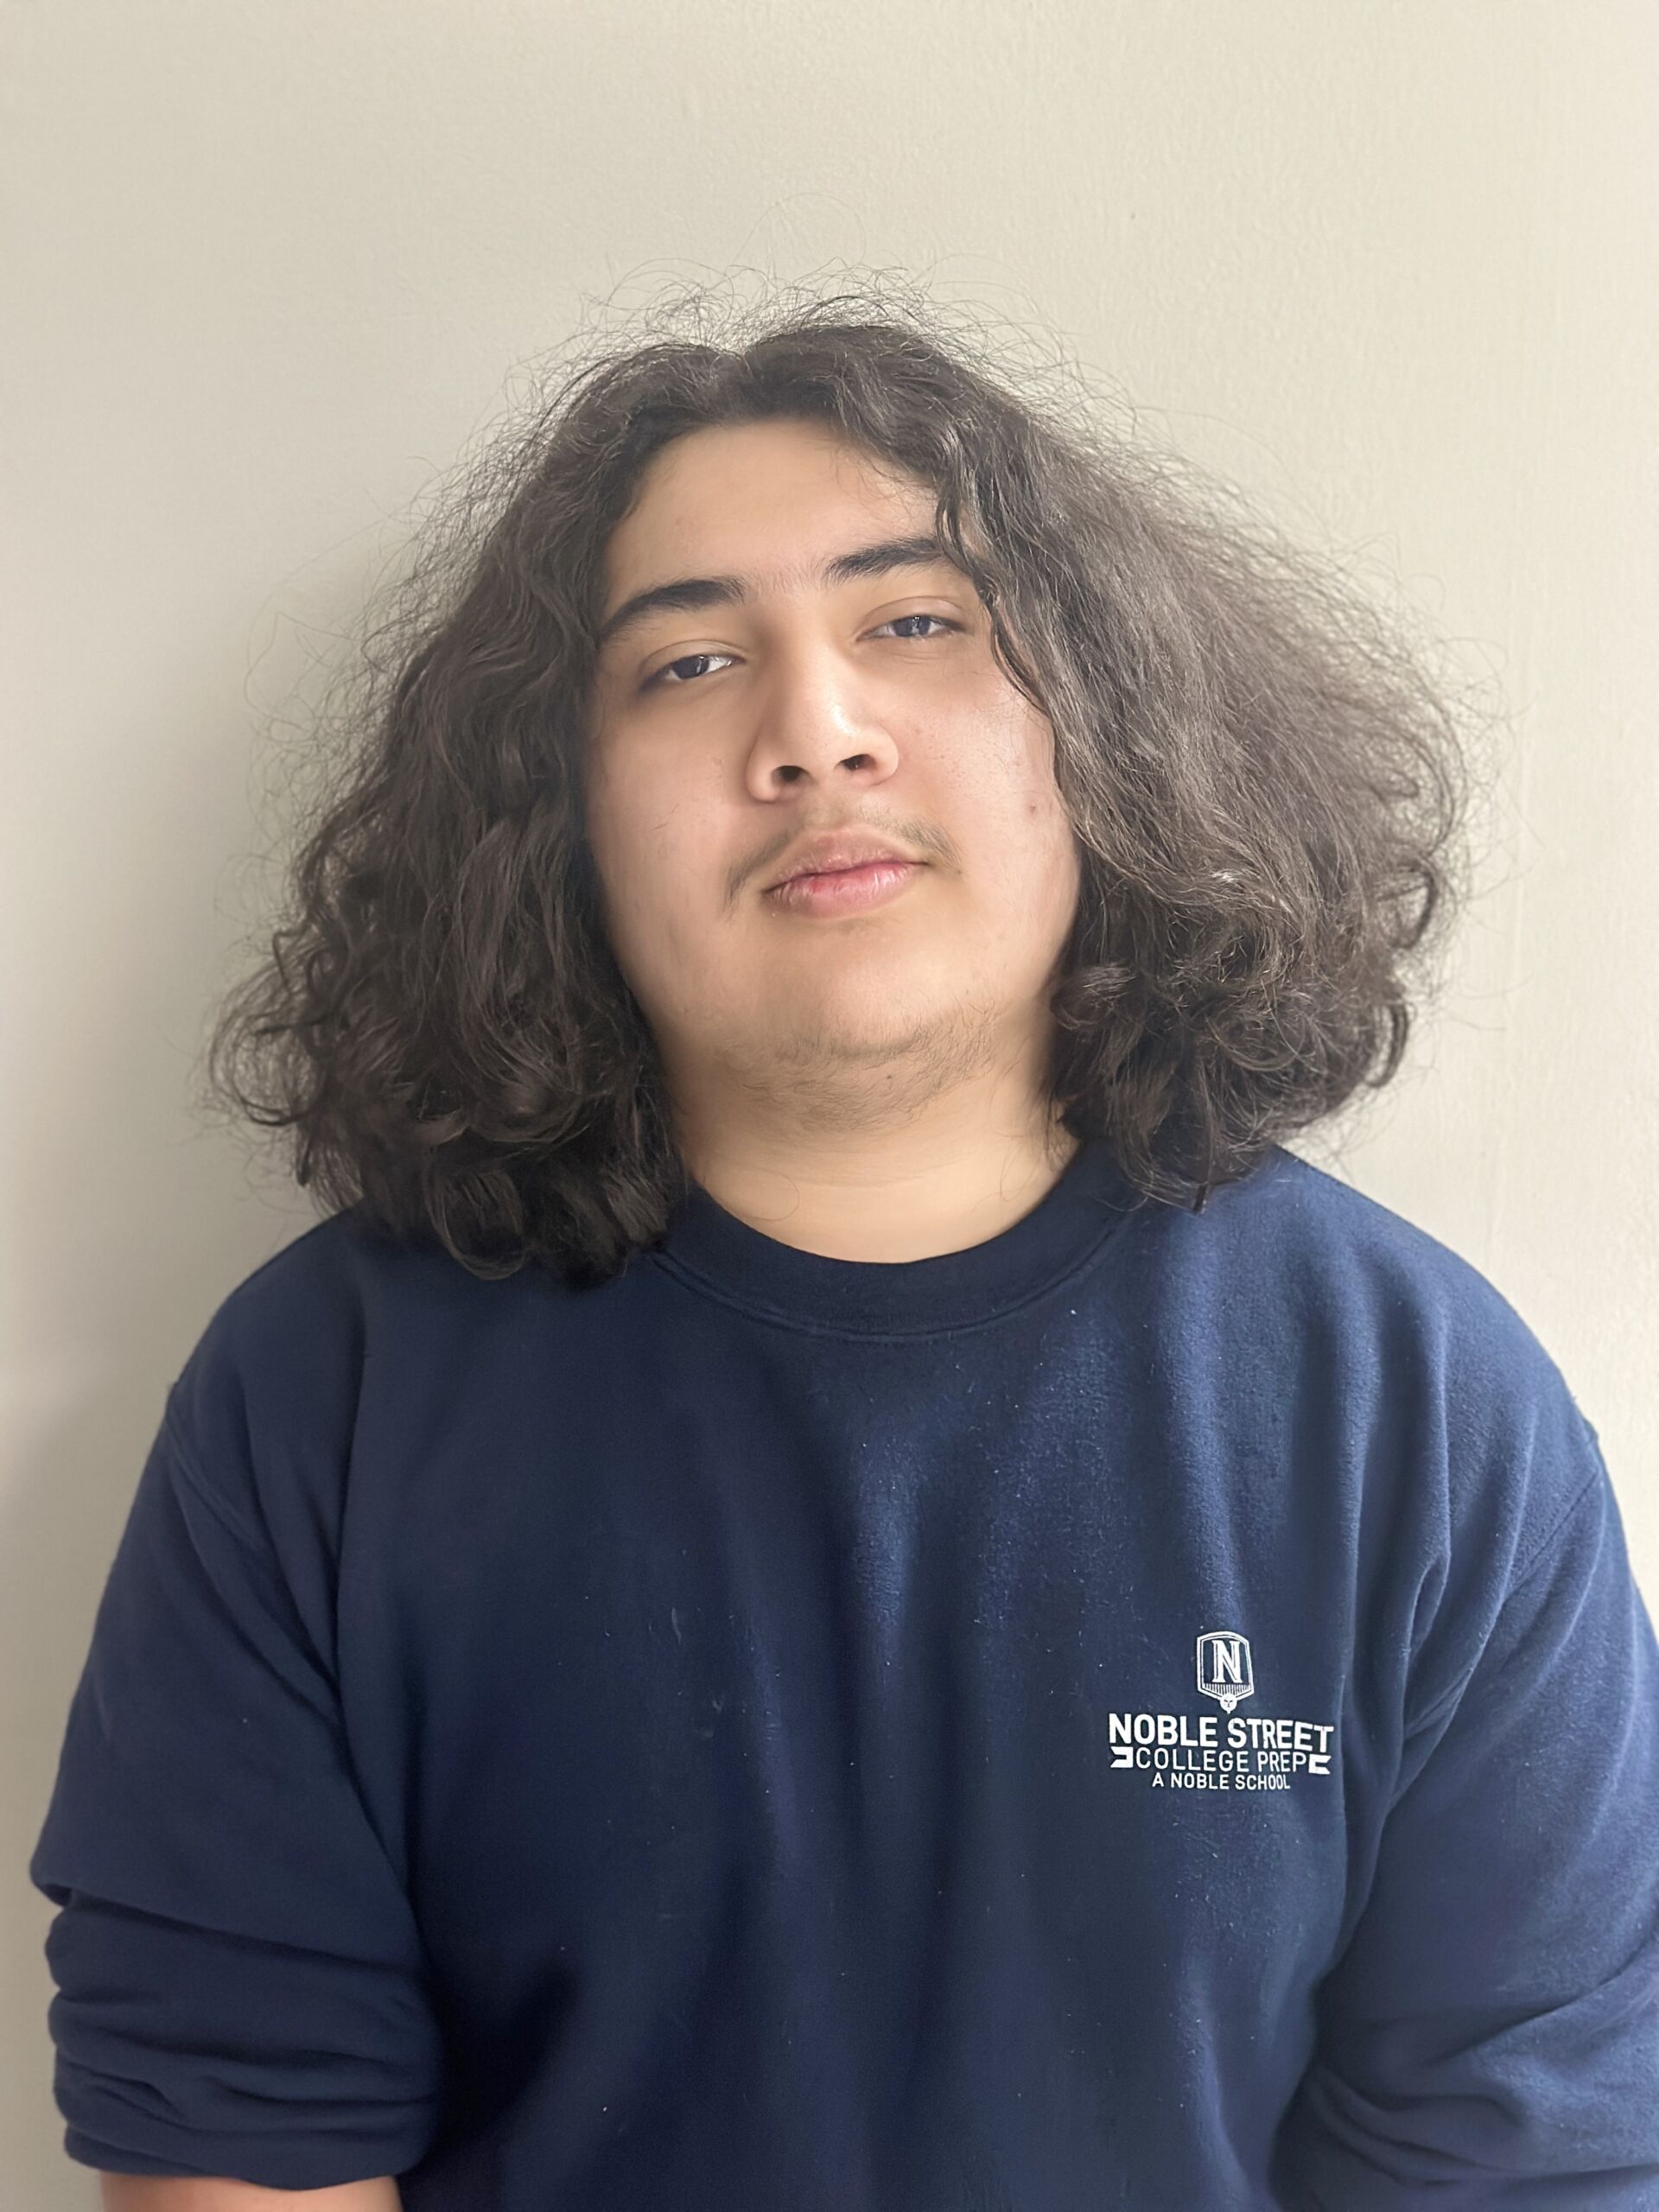 This photo shows a headshot of Miguel Carbajal, a student at Noble Street College Prep. He is a young Latine man with shoulder-length wavy hair. In this photo, he is wearing a dark blue sweatshirt with the Noble Street logo on it.